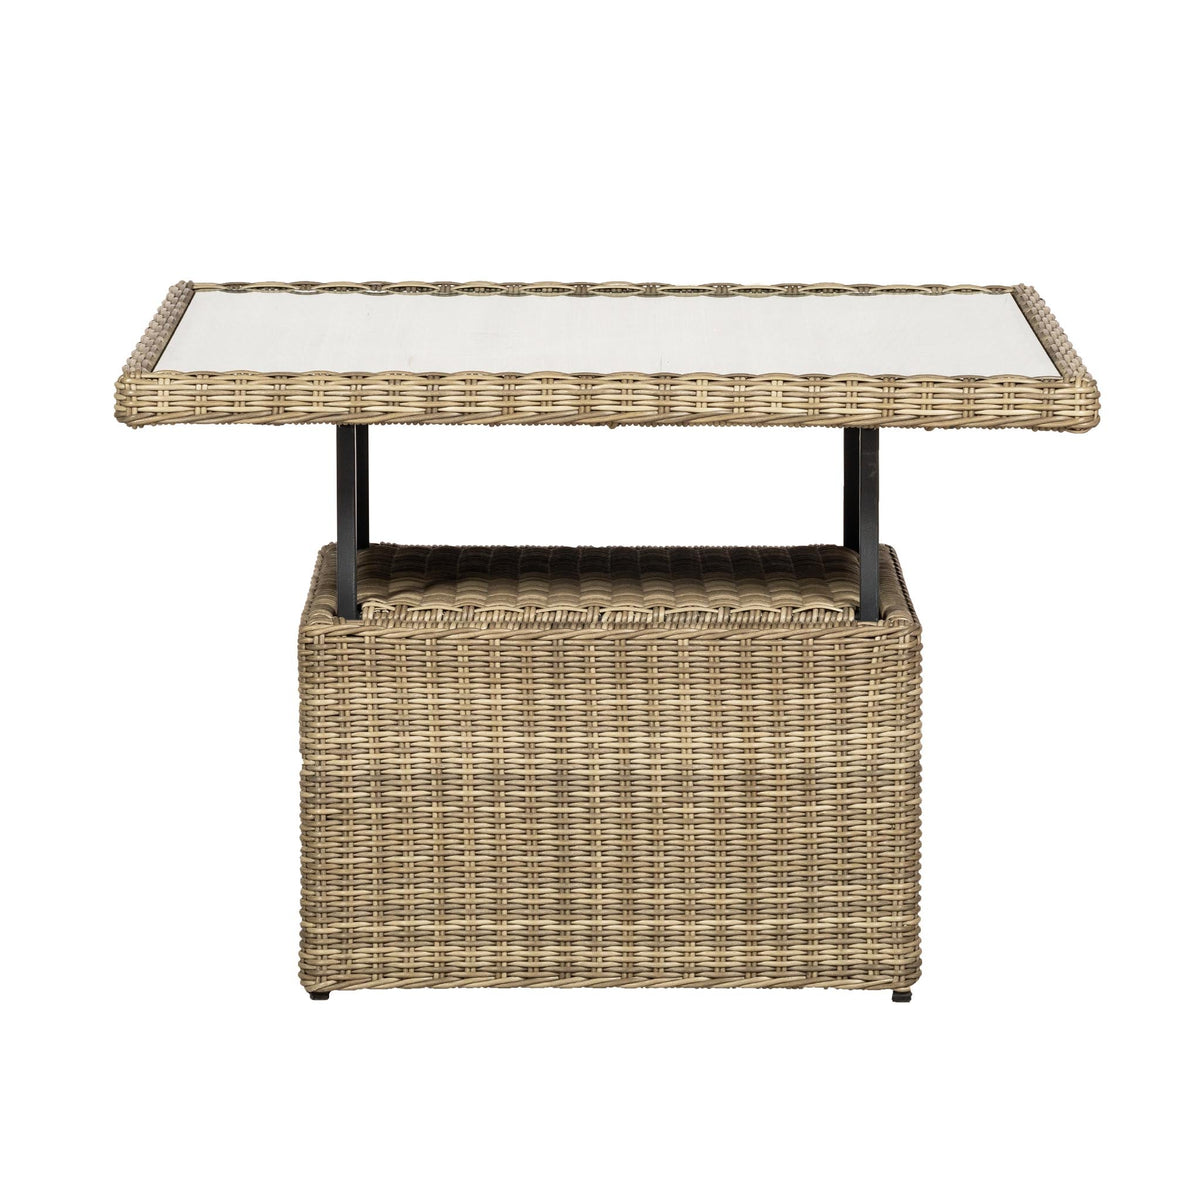 Wentworth Rattan Garden Lounge Dining Set with Adjustable Square Table